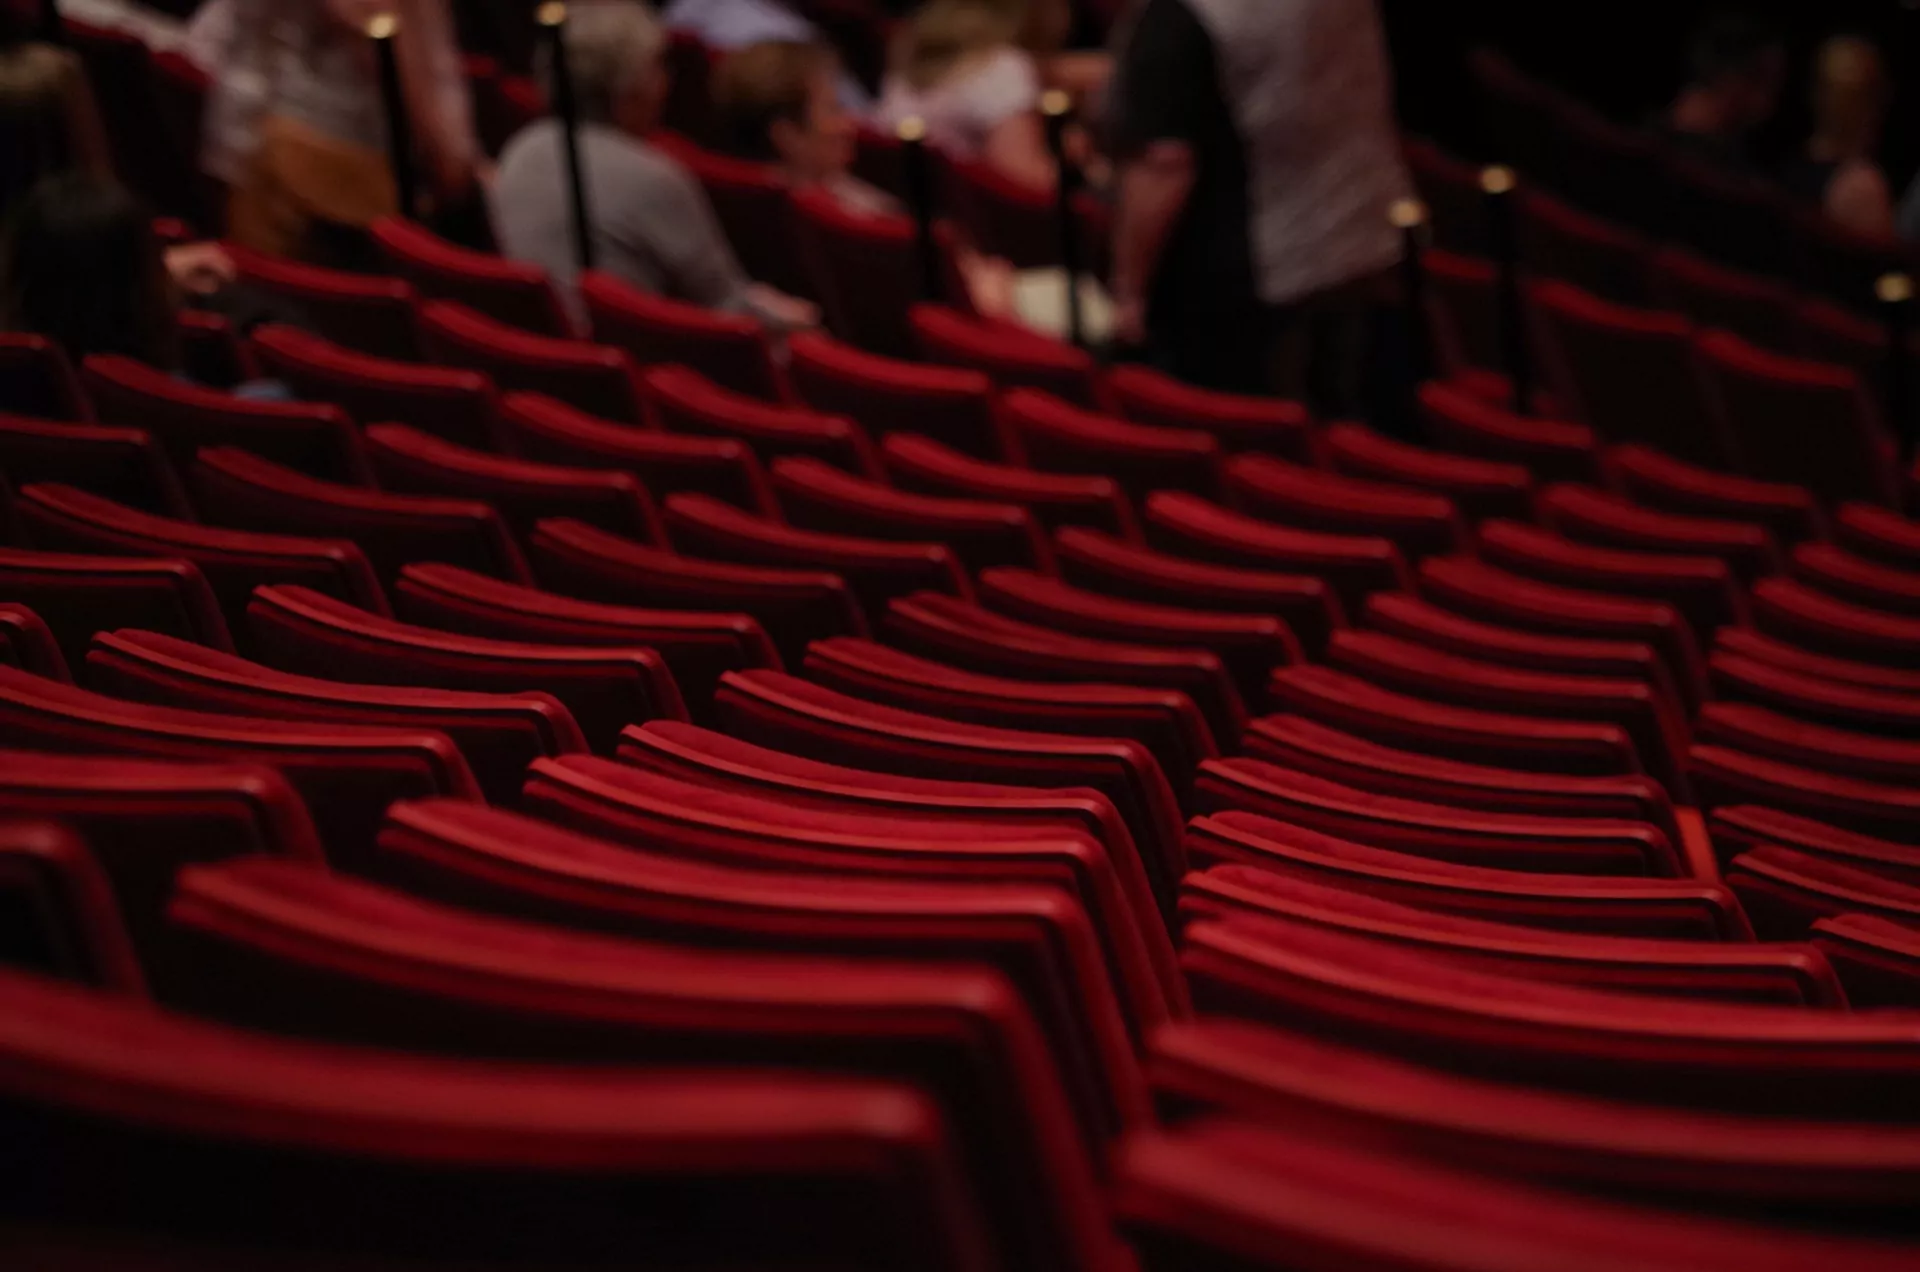 Rows of red velvet cinema chairs surrounding a stage. Time-lapse of theatres.